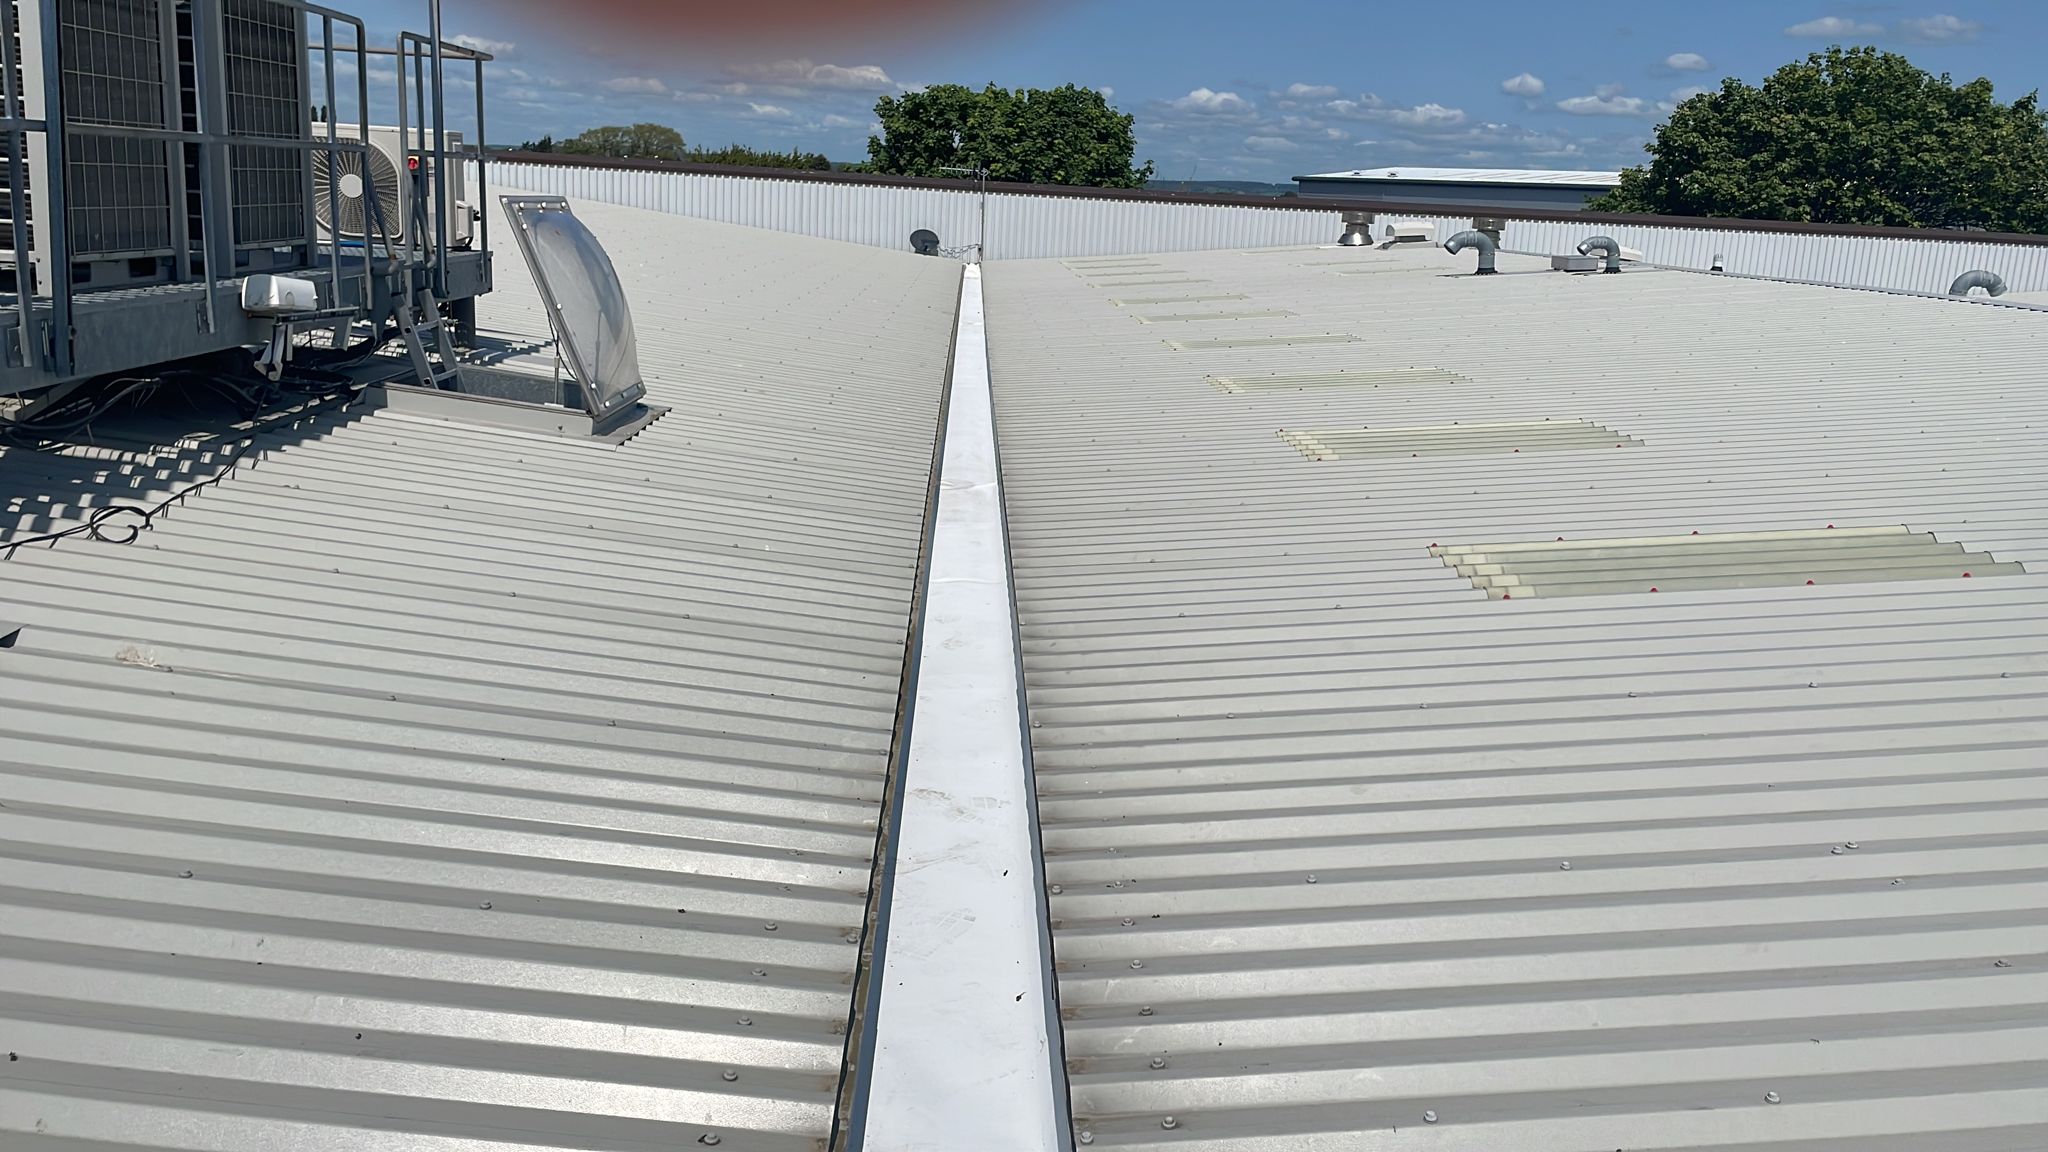 repairs to a gutter serving an office and workshop roof in Bognor Regis, West Sussex